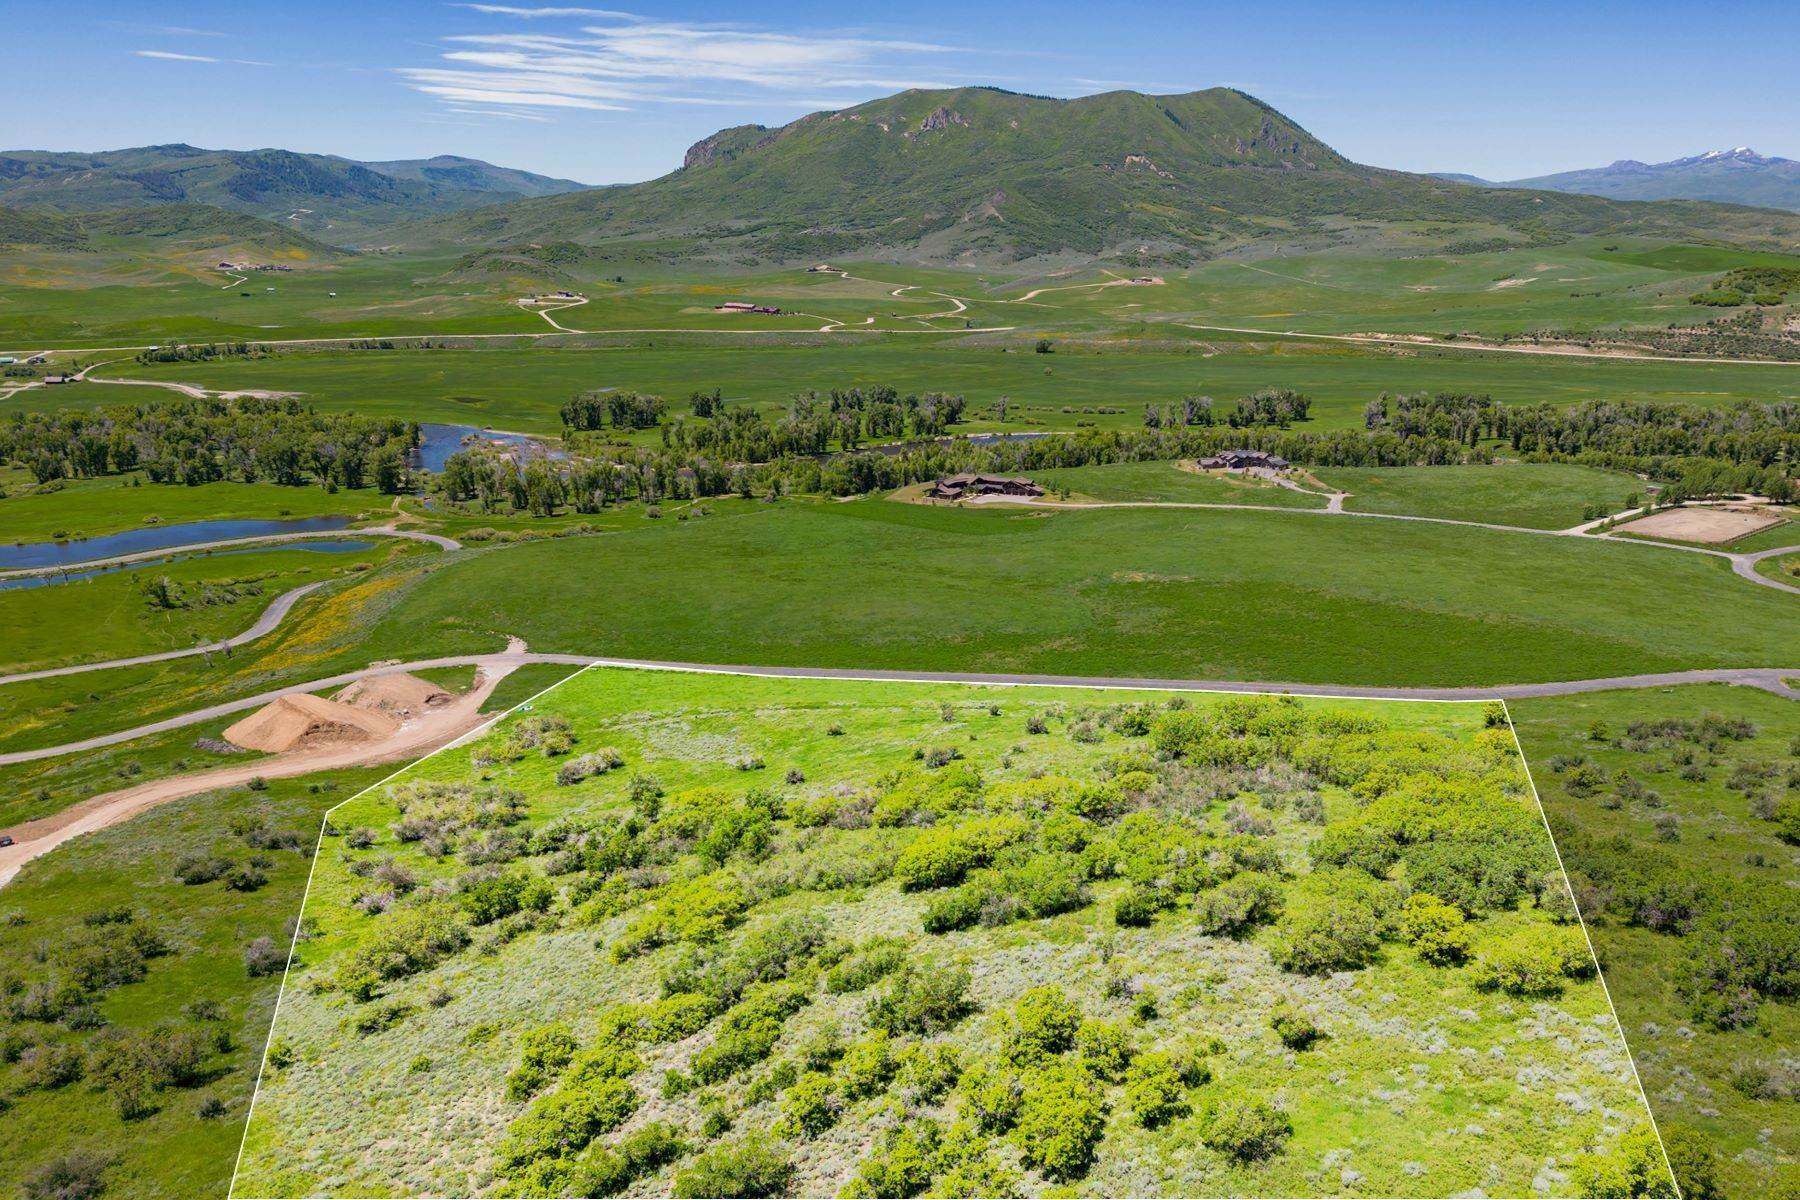 Property for Sale at 41800 Marabou Loop, Steamboat Springs, CO, 80487 41800 Marabou Loop Steamboat Springs, Colorado 80487 United States